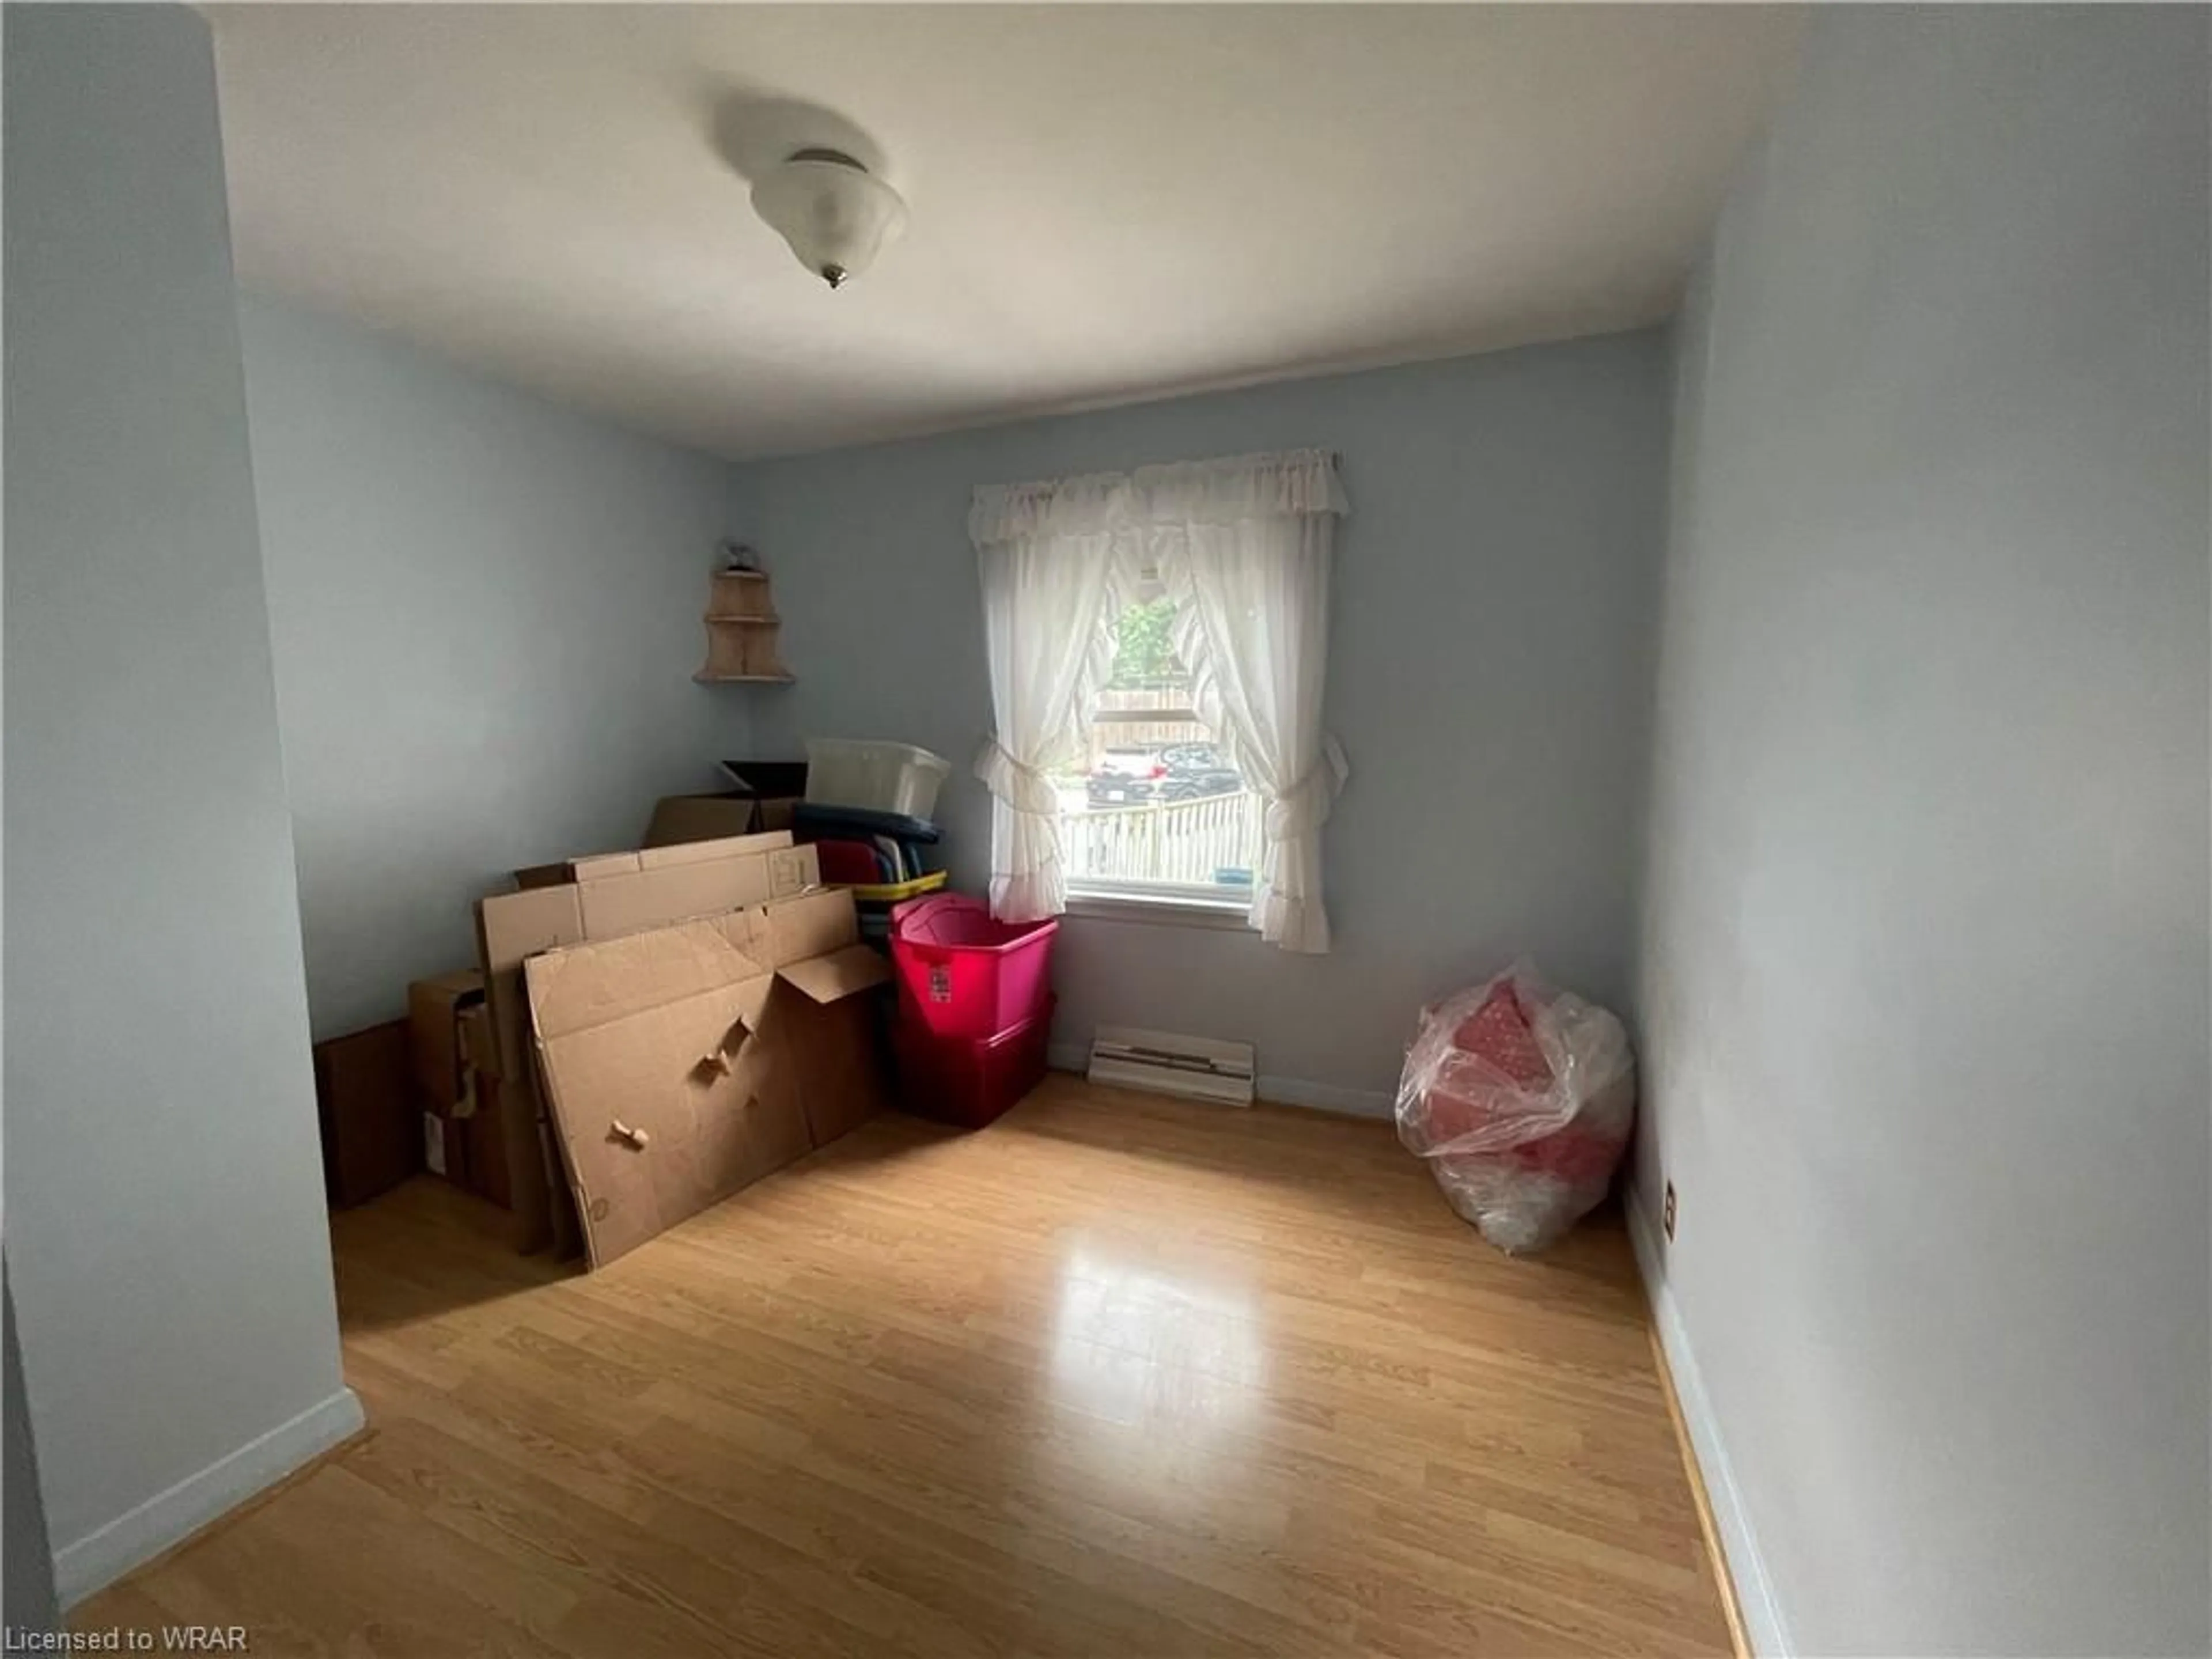 A pic of a room for 217 Vanier Dr, Kitchener Ontario N2C 1J6